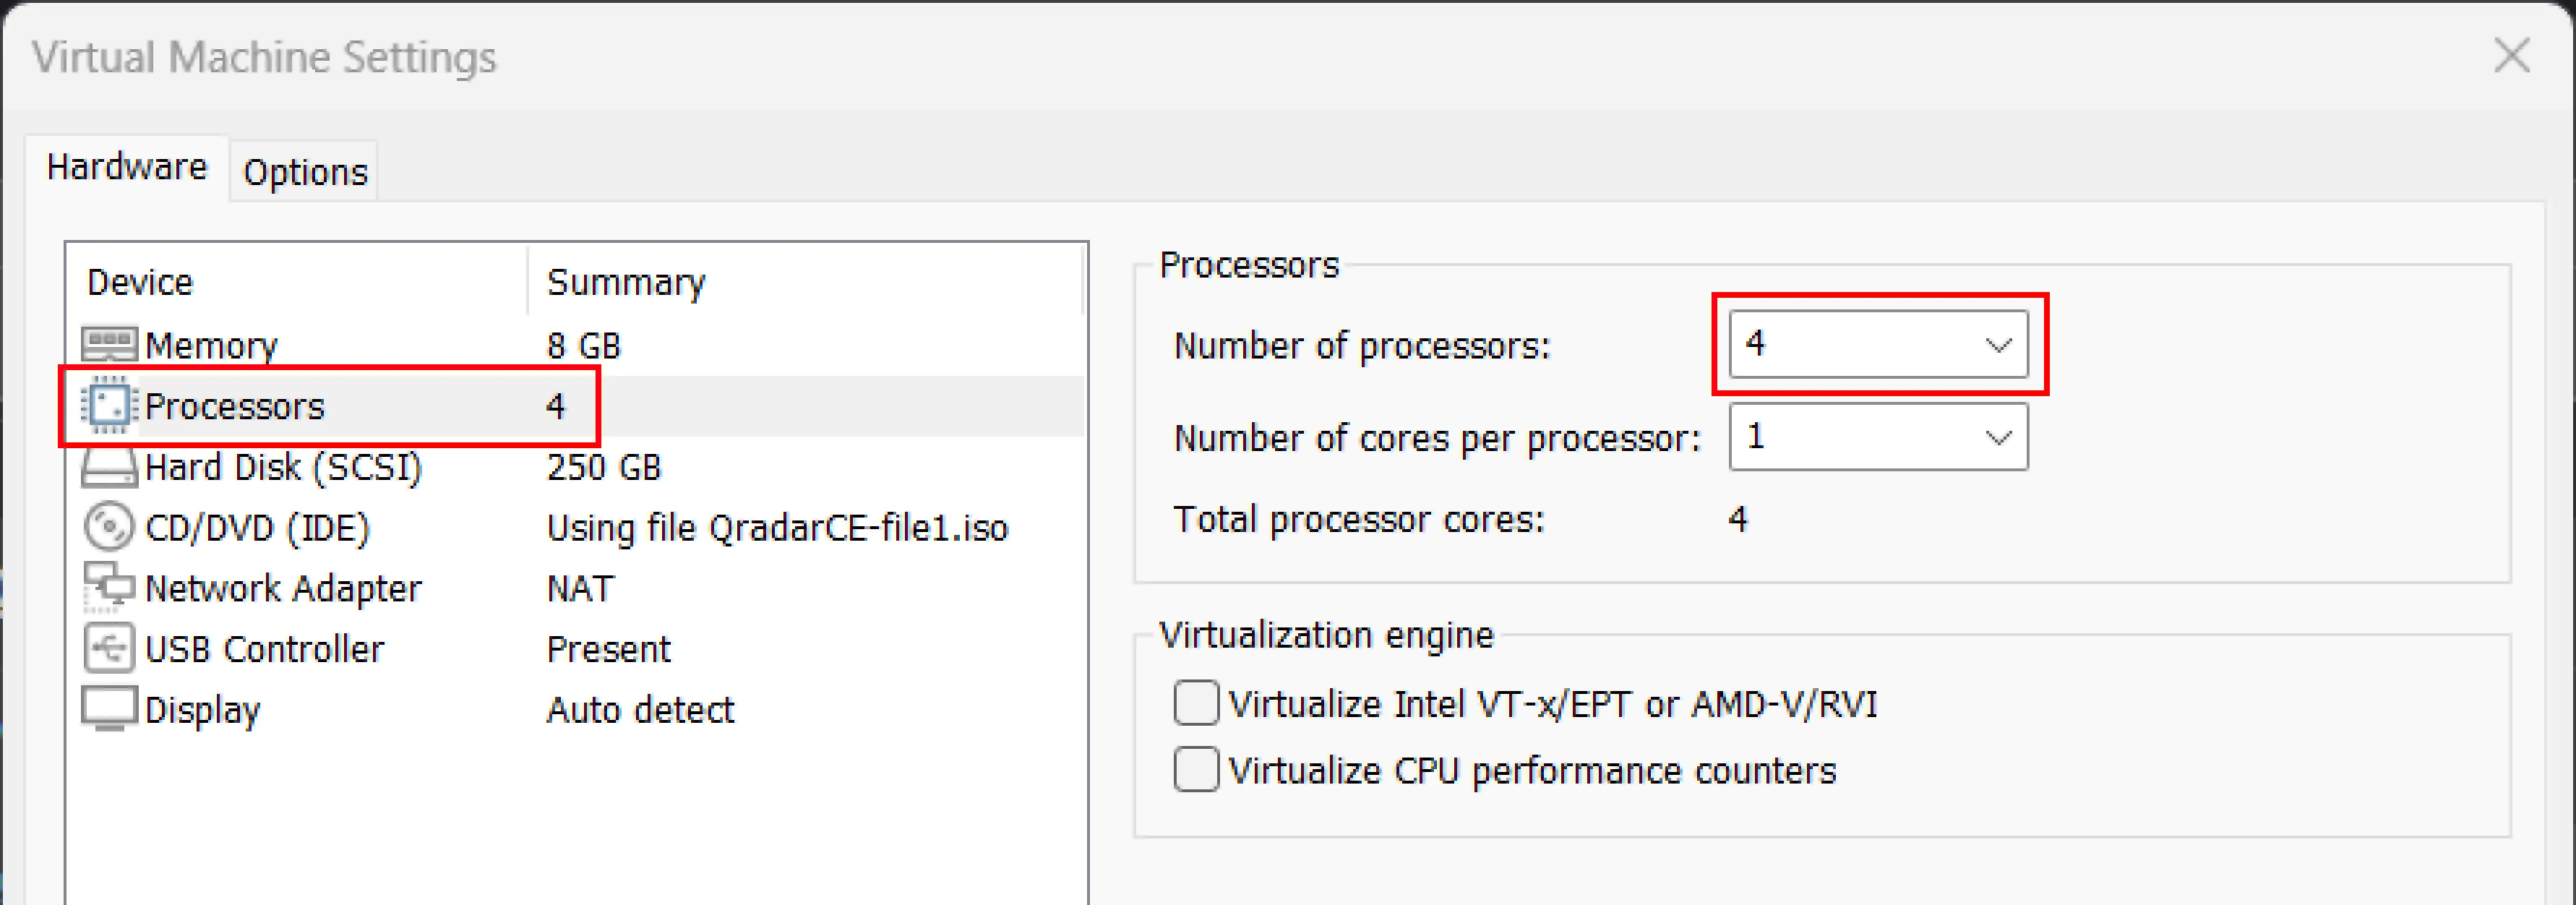 Set the Processors to 2 cores (minimum) or 6 cores (recommended)